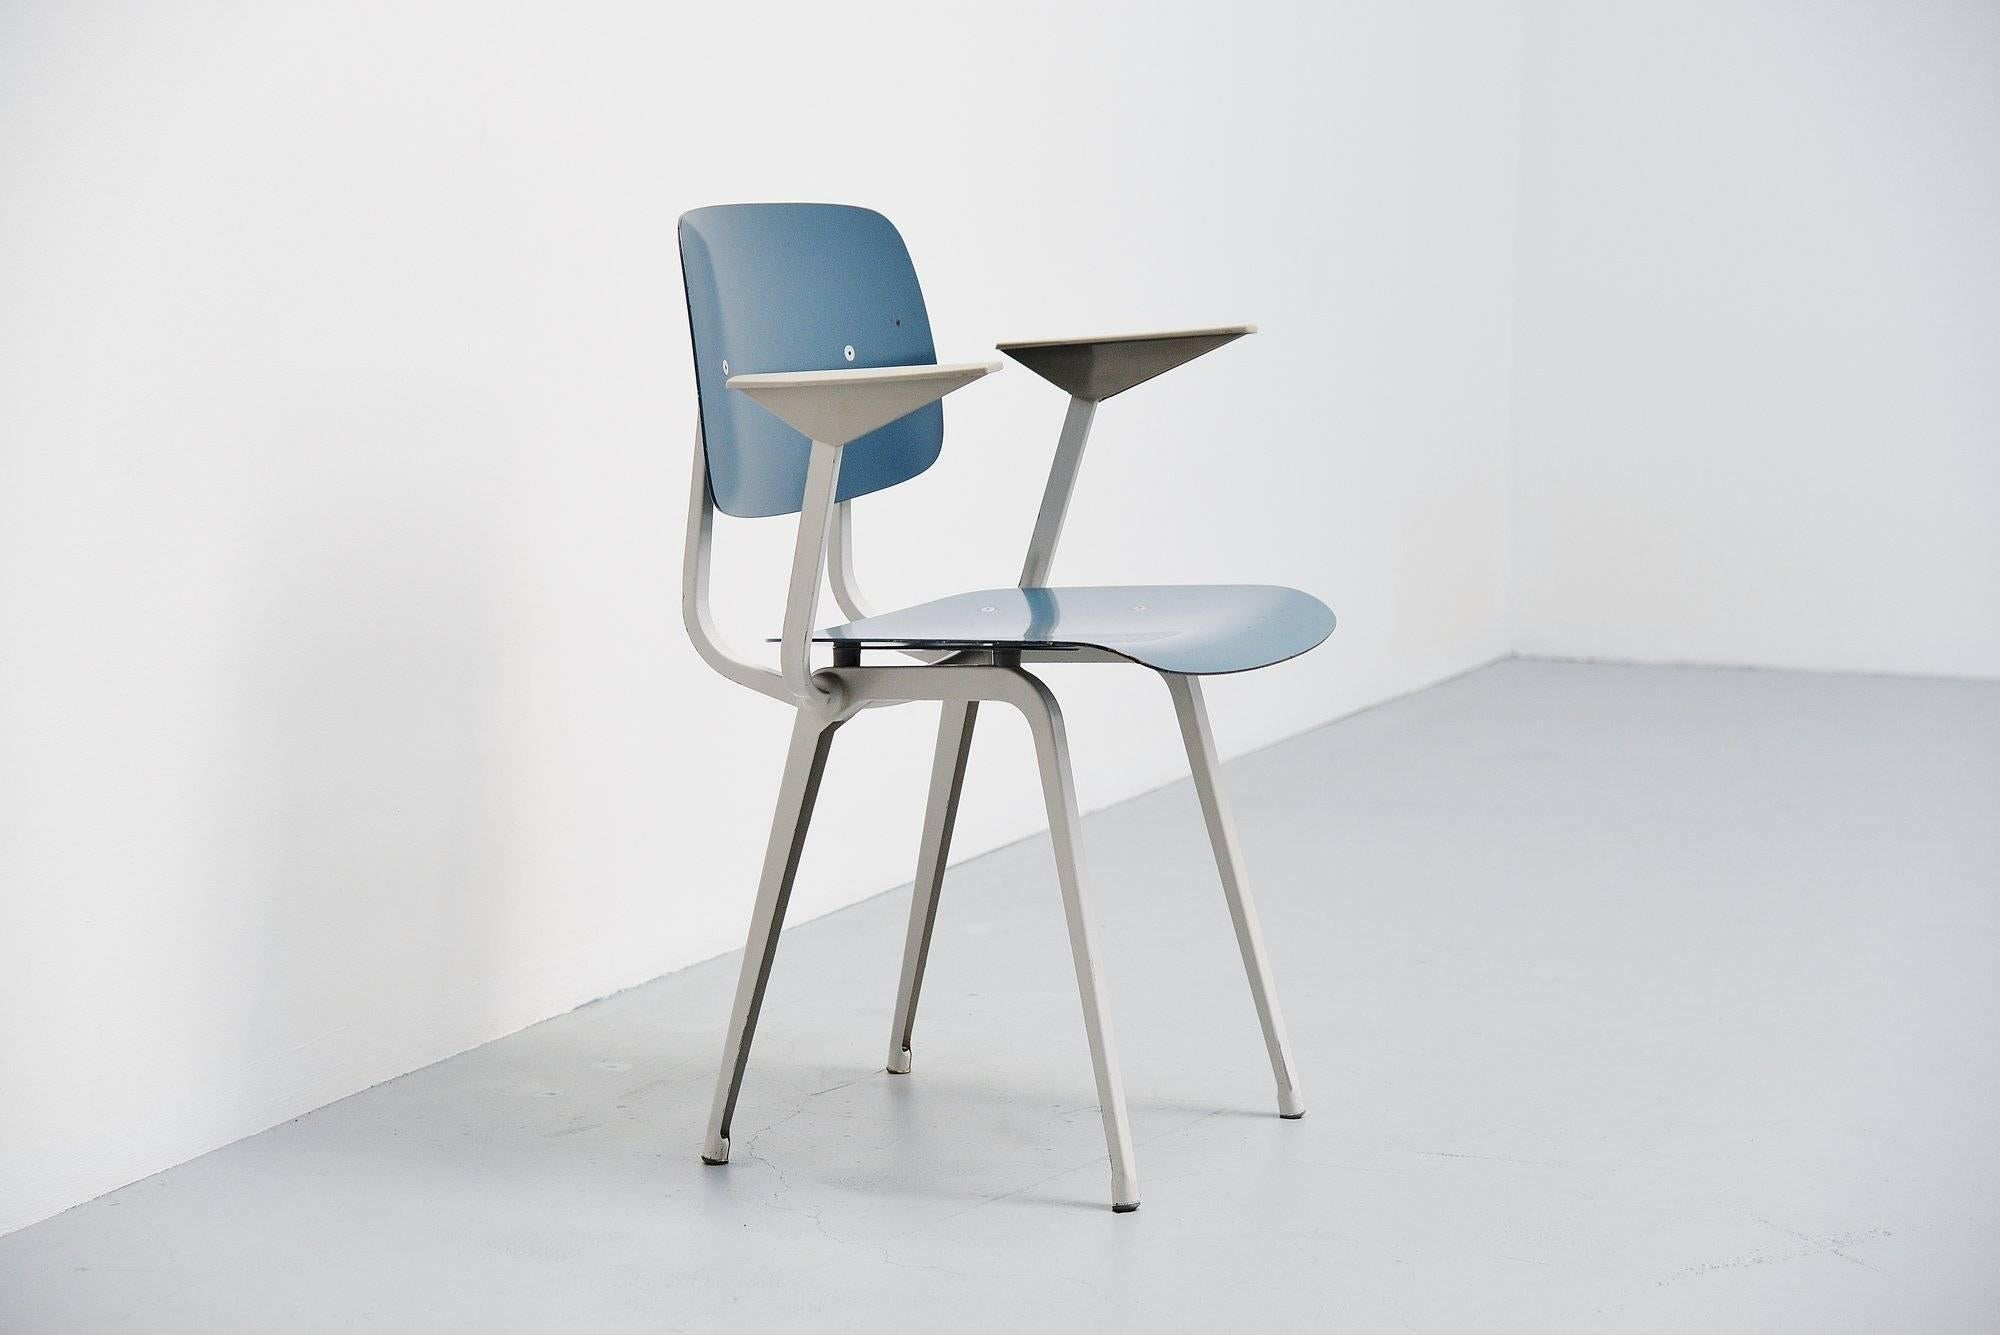 Cold-Painted Friso Kramer Revolt Chair with Arms for Ahrend de Cirkel, 1953